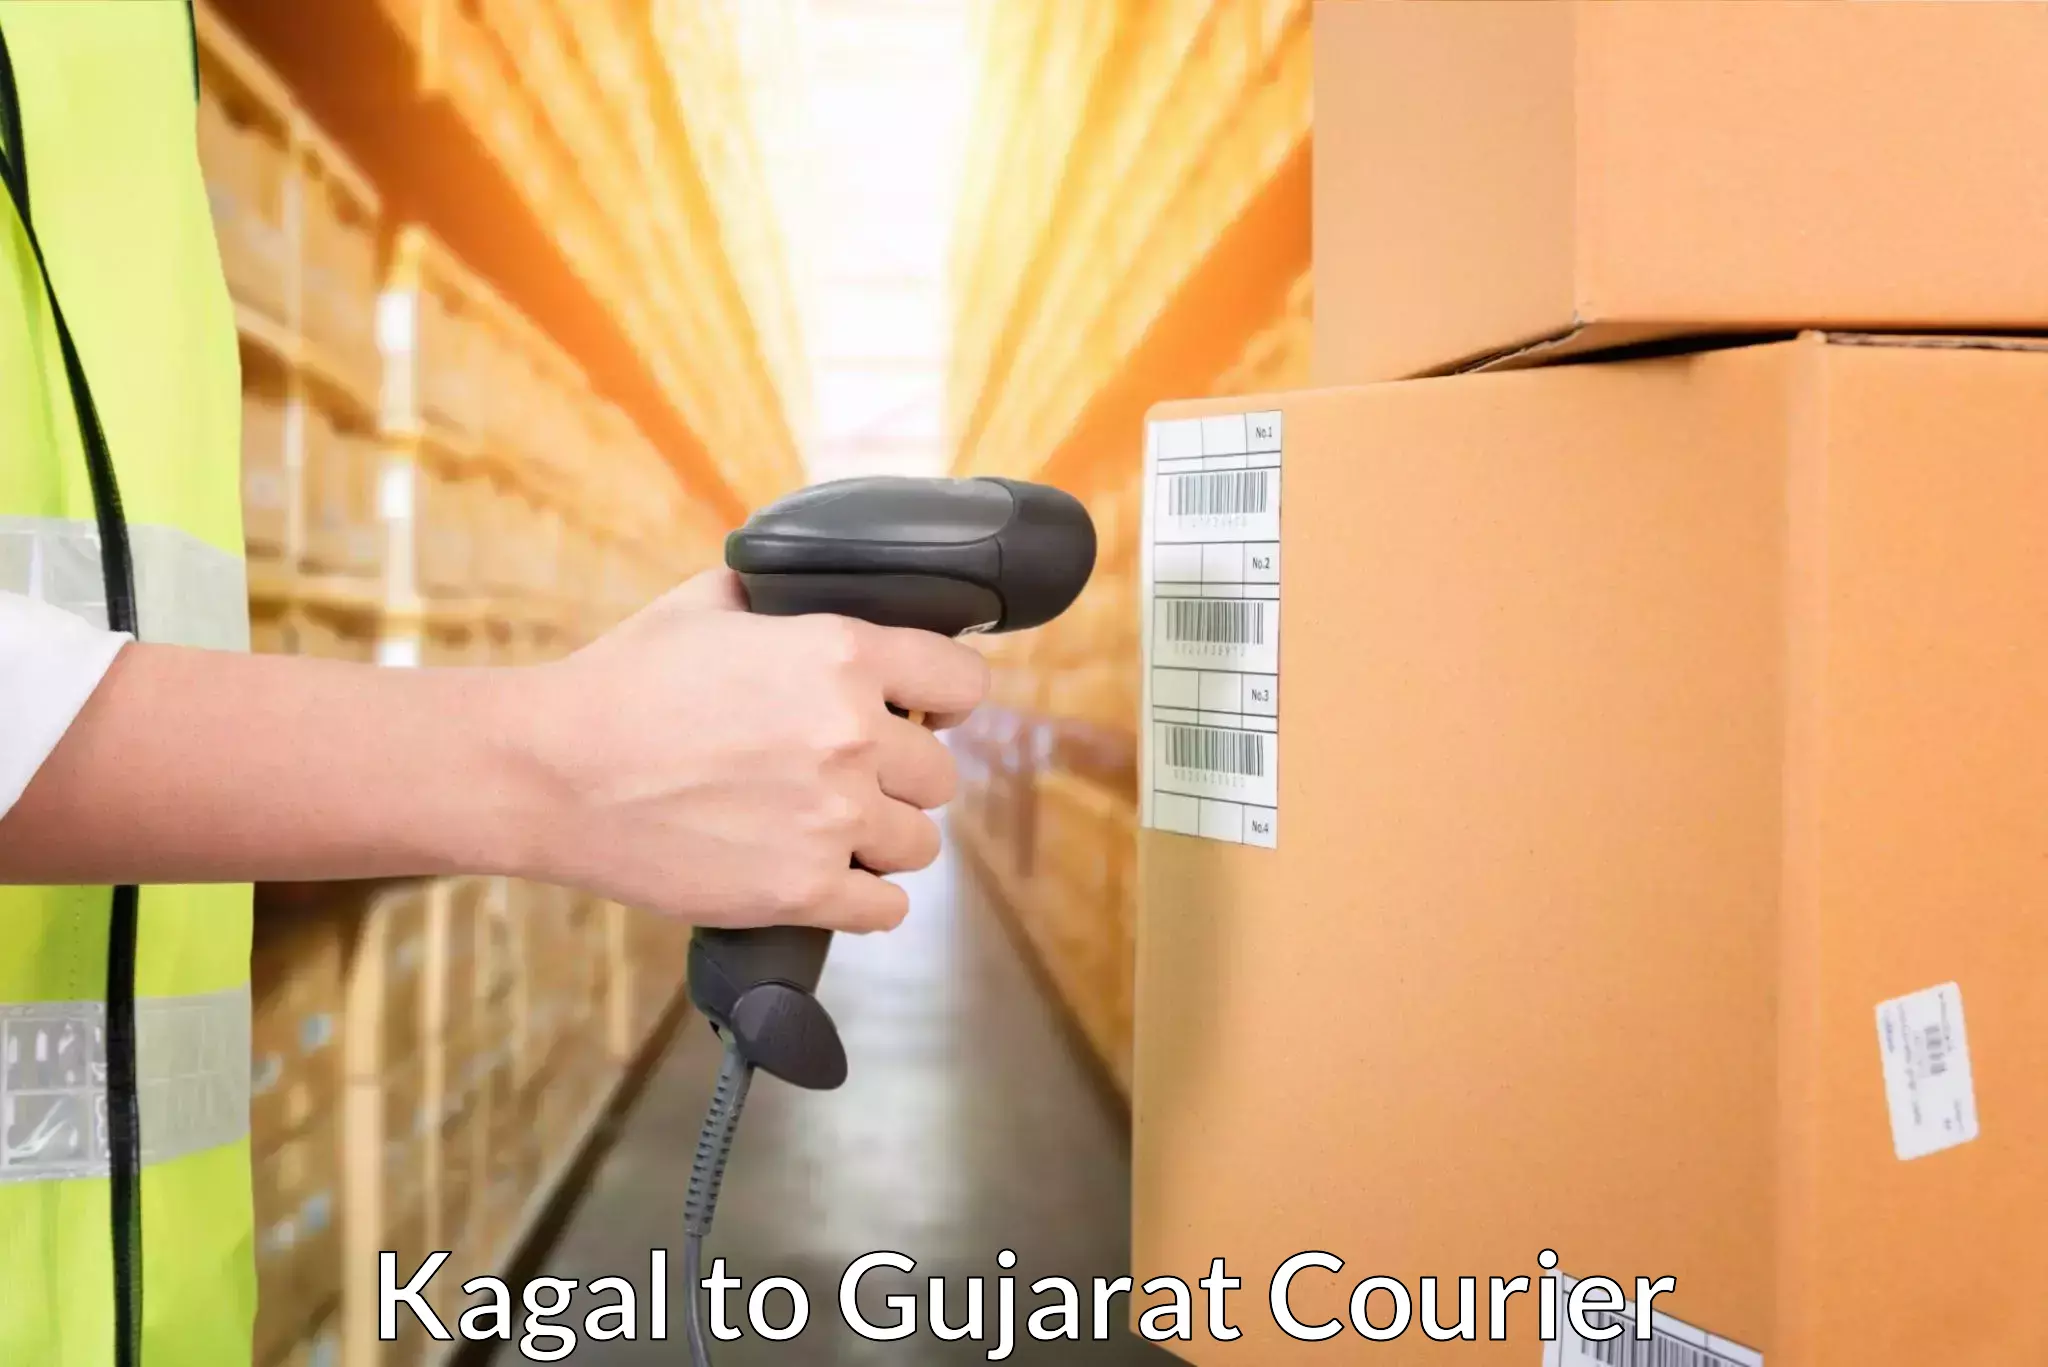 Quality courier services Kagal to Gujarat